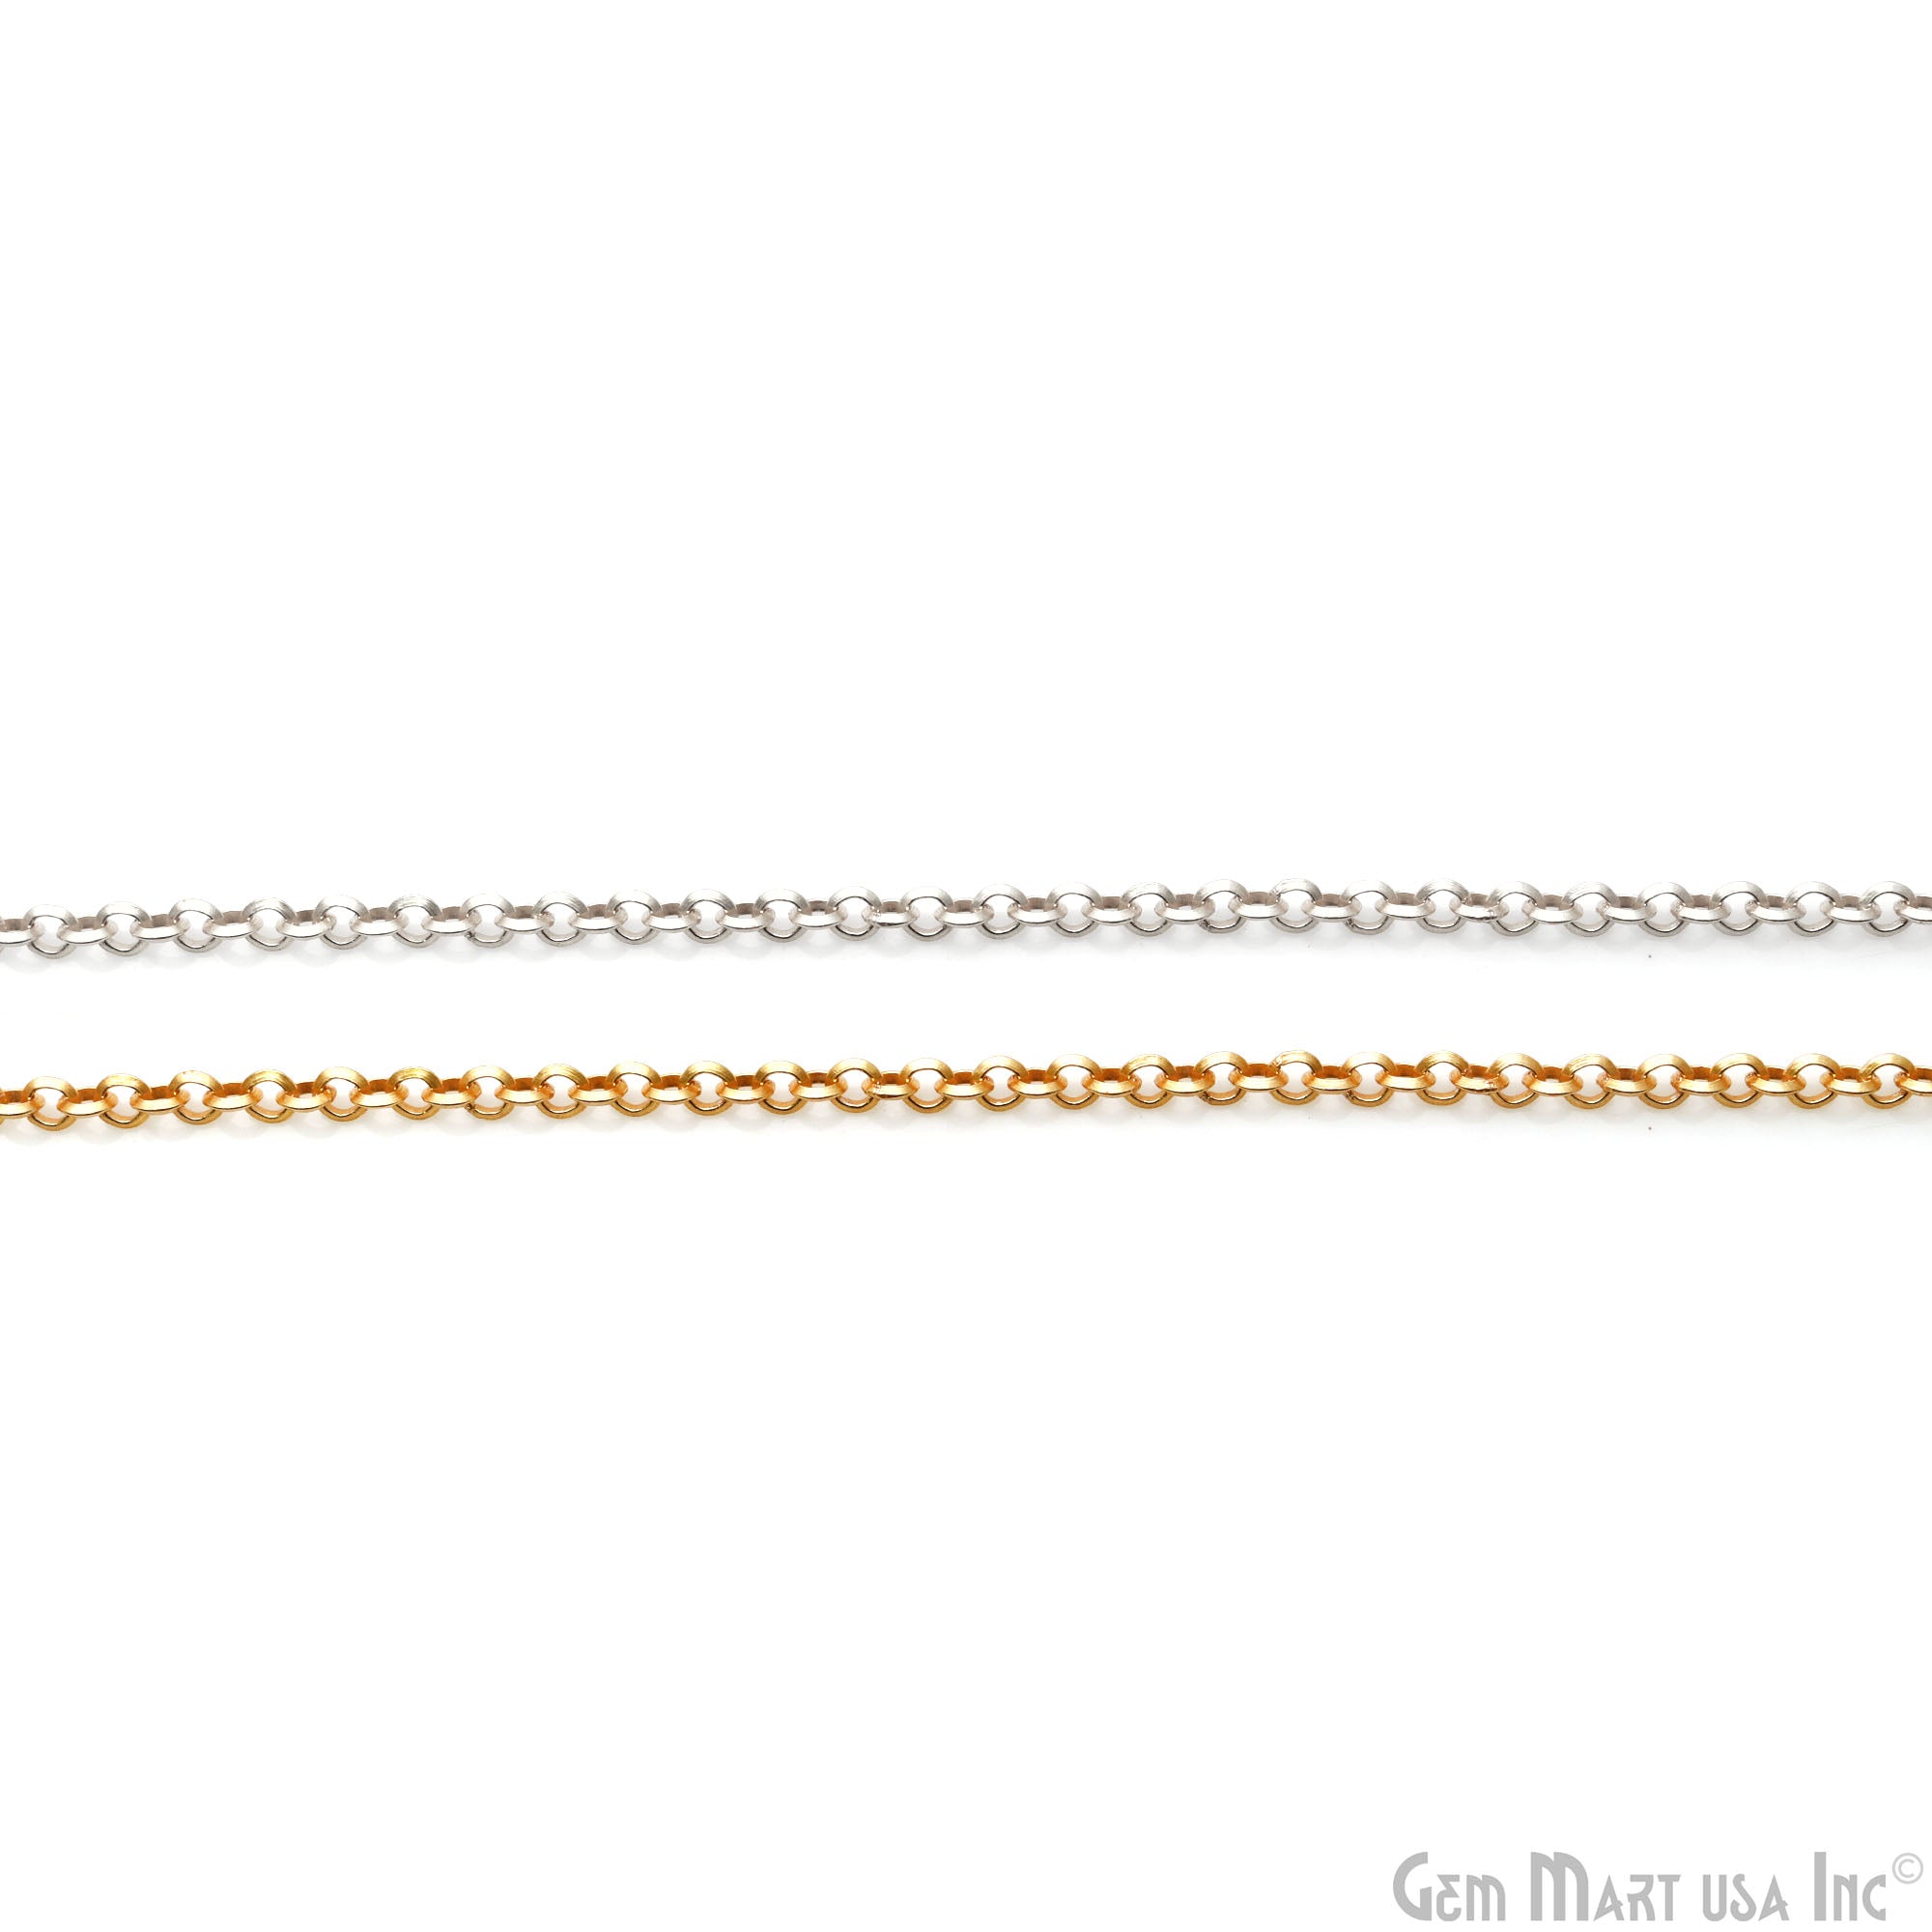 Cable Chain For Jewelry Making 3mm Cable Link Chain Necklace